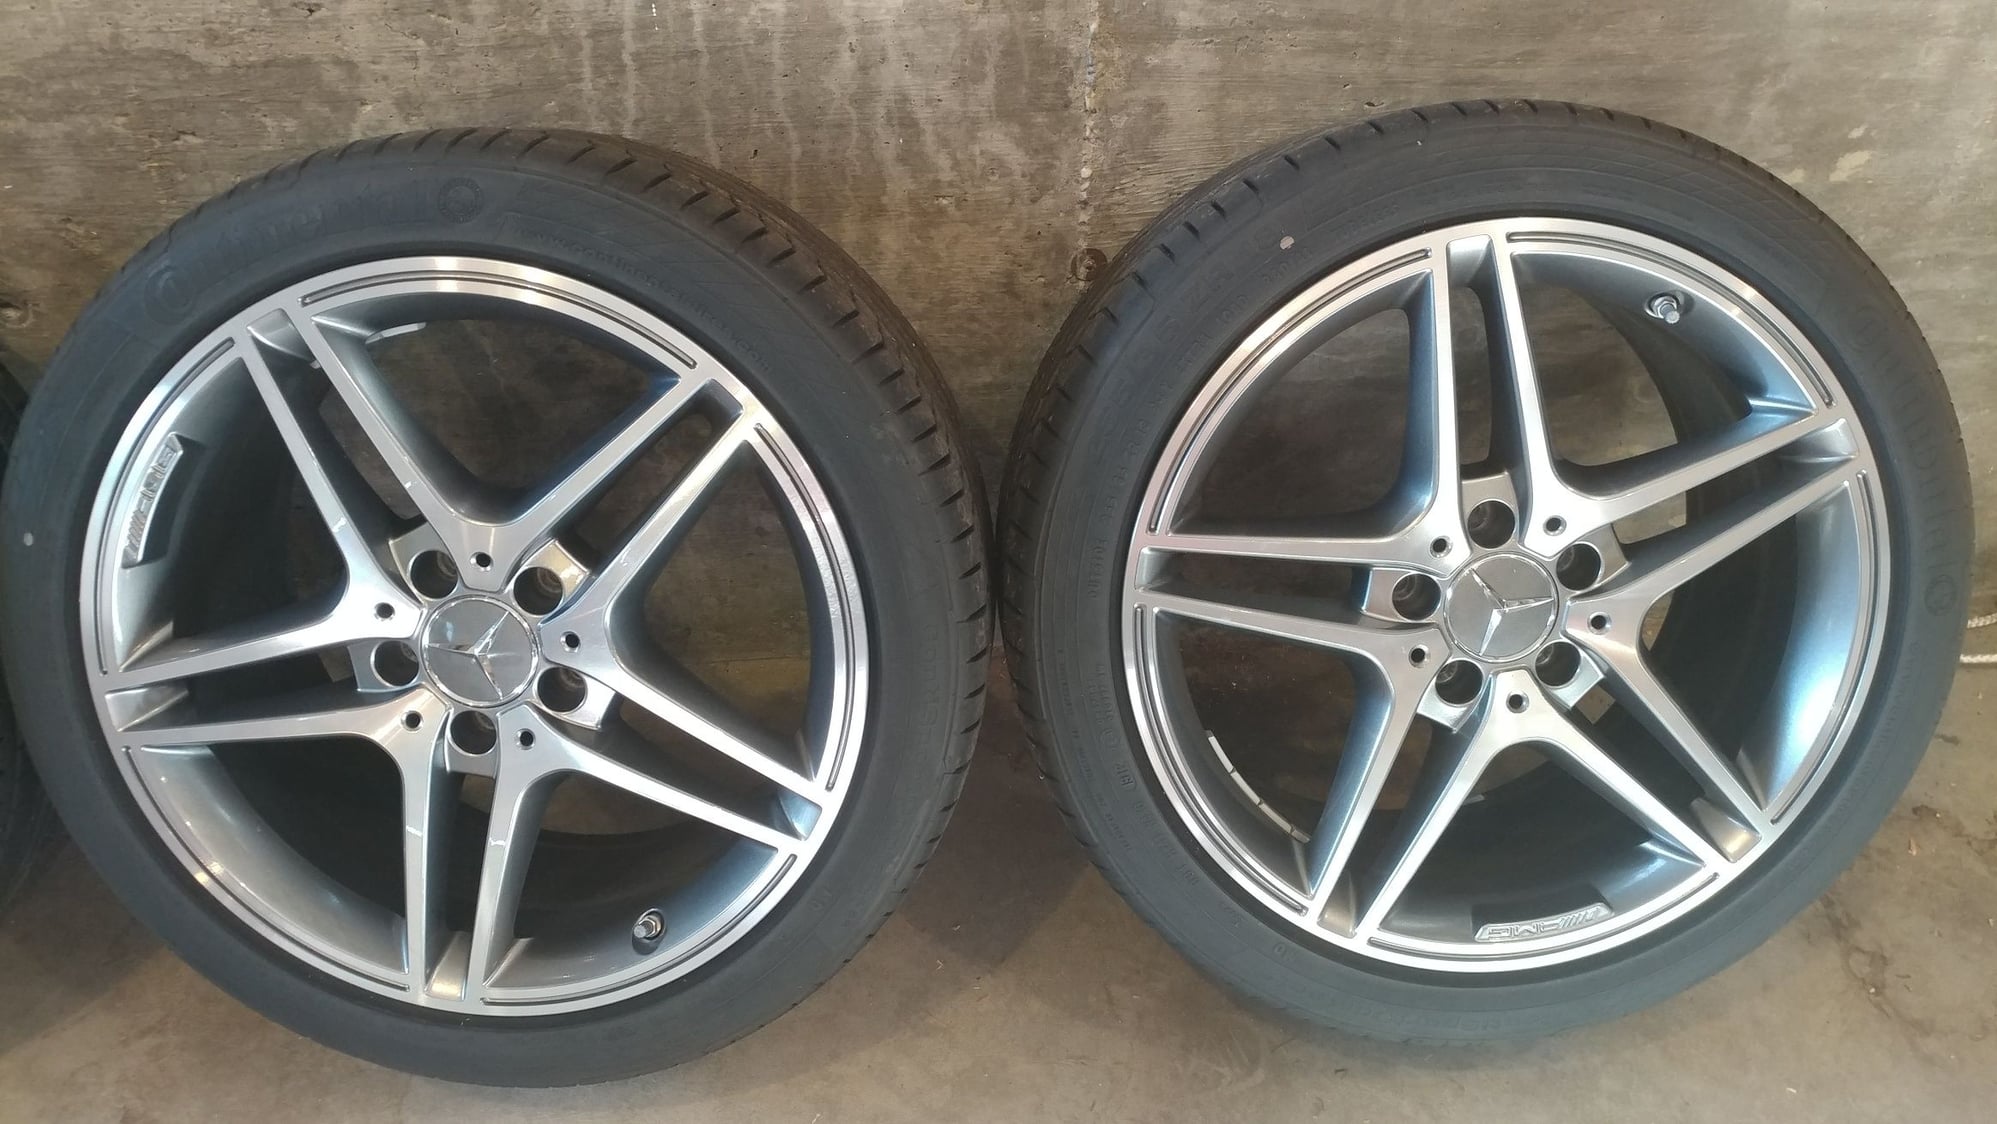 Wheels and Tires/Axles - W204 AMG C63 Split 5 spoke wheels and tires  - $1500 - Used - 2008 to 2015 Mercedes-Benz C63 AMG - Seattle, WA 98105, United States